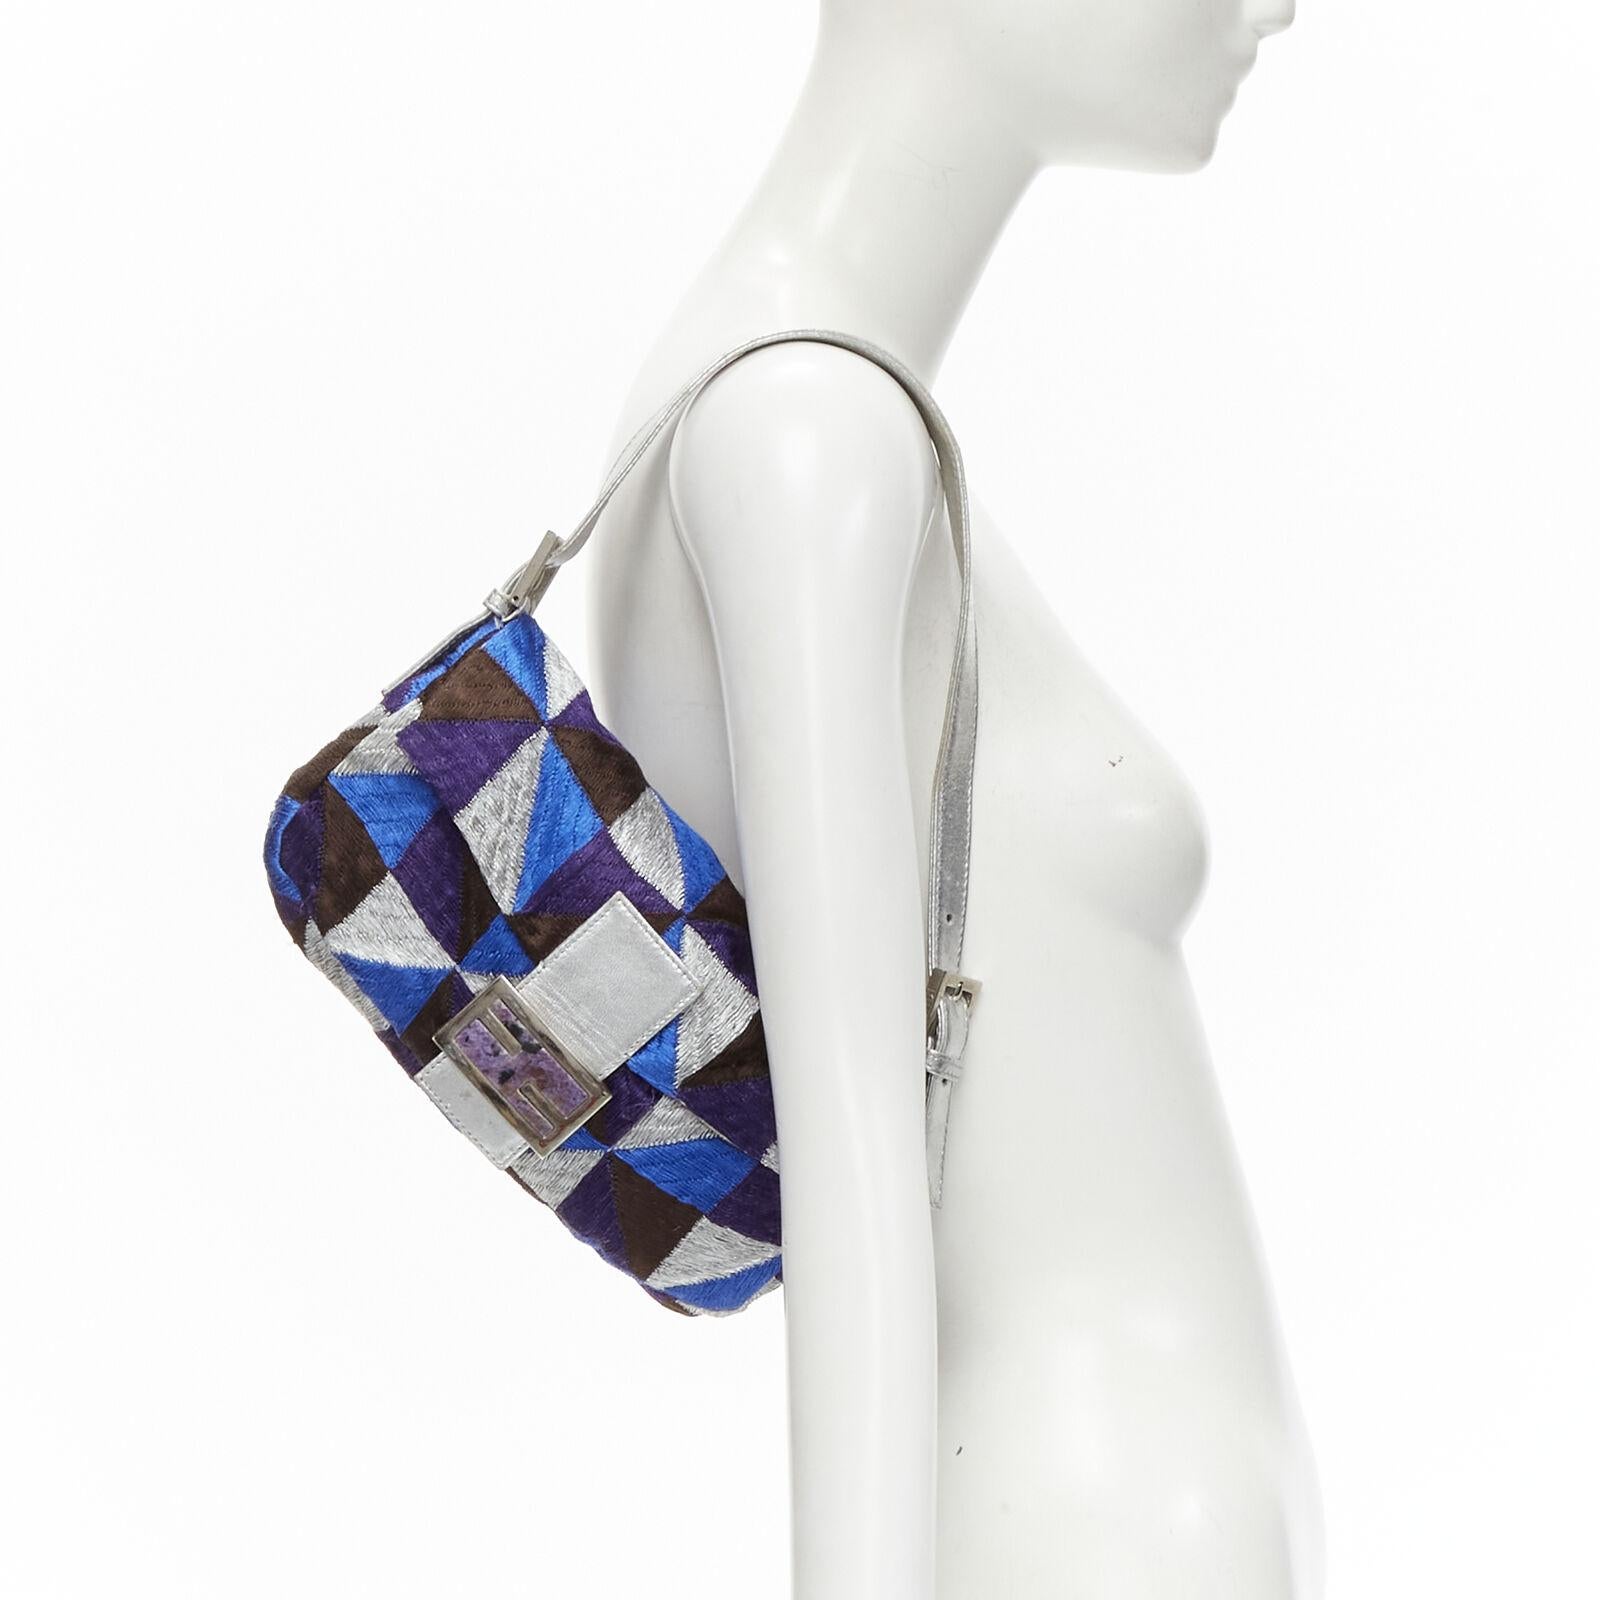 FENDI Baguette blue silver embroidery patchwork FF purple stone buckle bag
Reference: TGAS/C01566
Brand: Fendi
Model: Baguette
Material: Fabric, Metal
Color: Blue, Silver
Pattern: Geometric
Closure: Magnet
Lining: Silk
Made in: